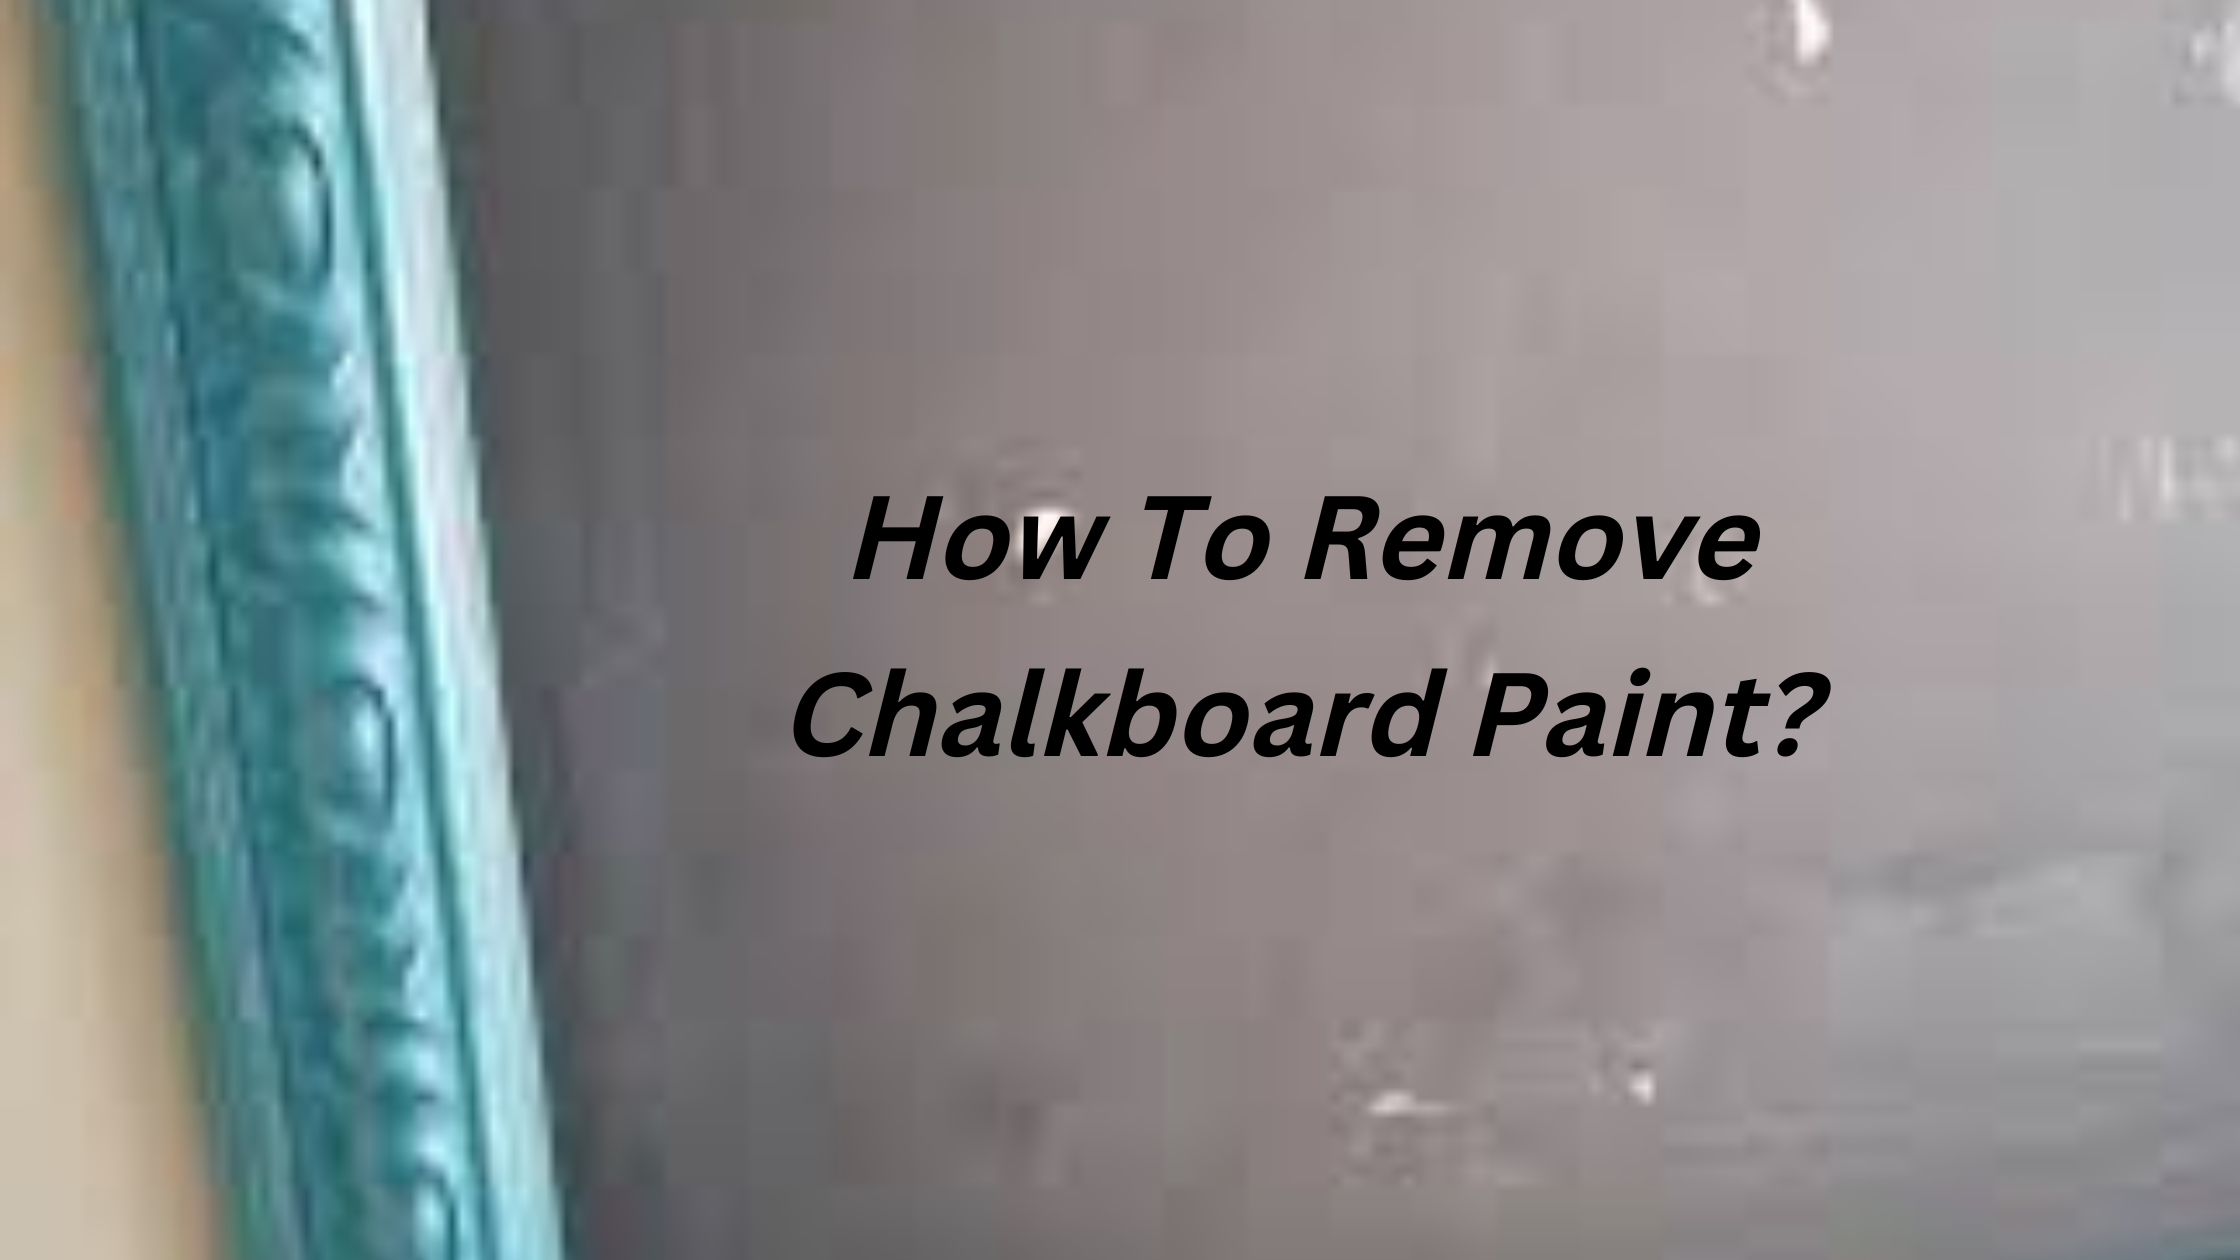 How To Remove Chalkboard Paint?